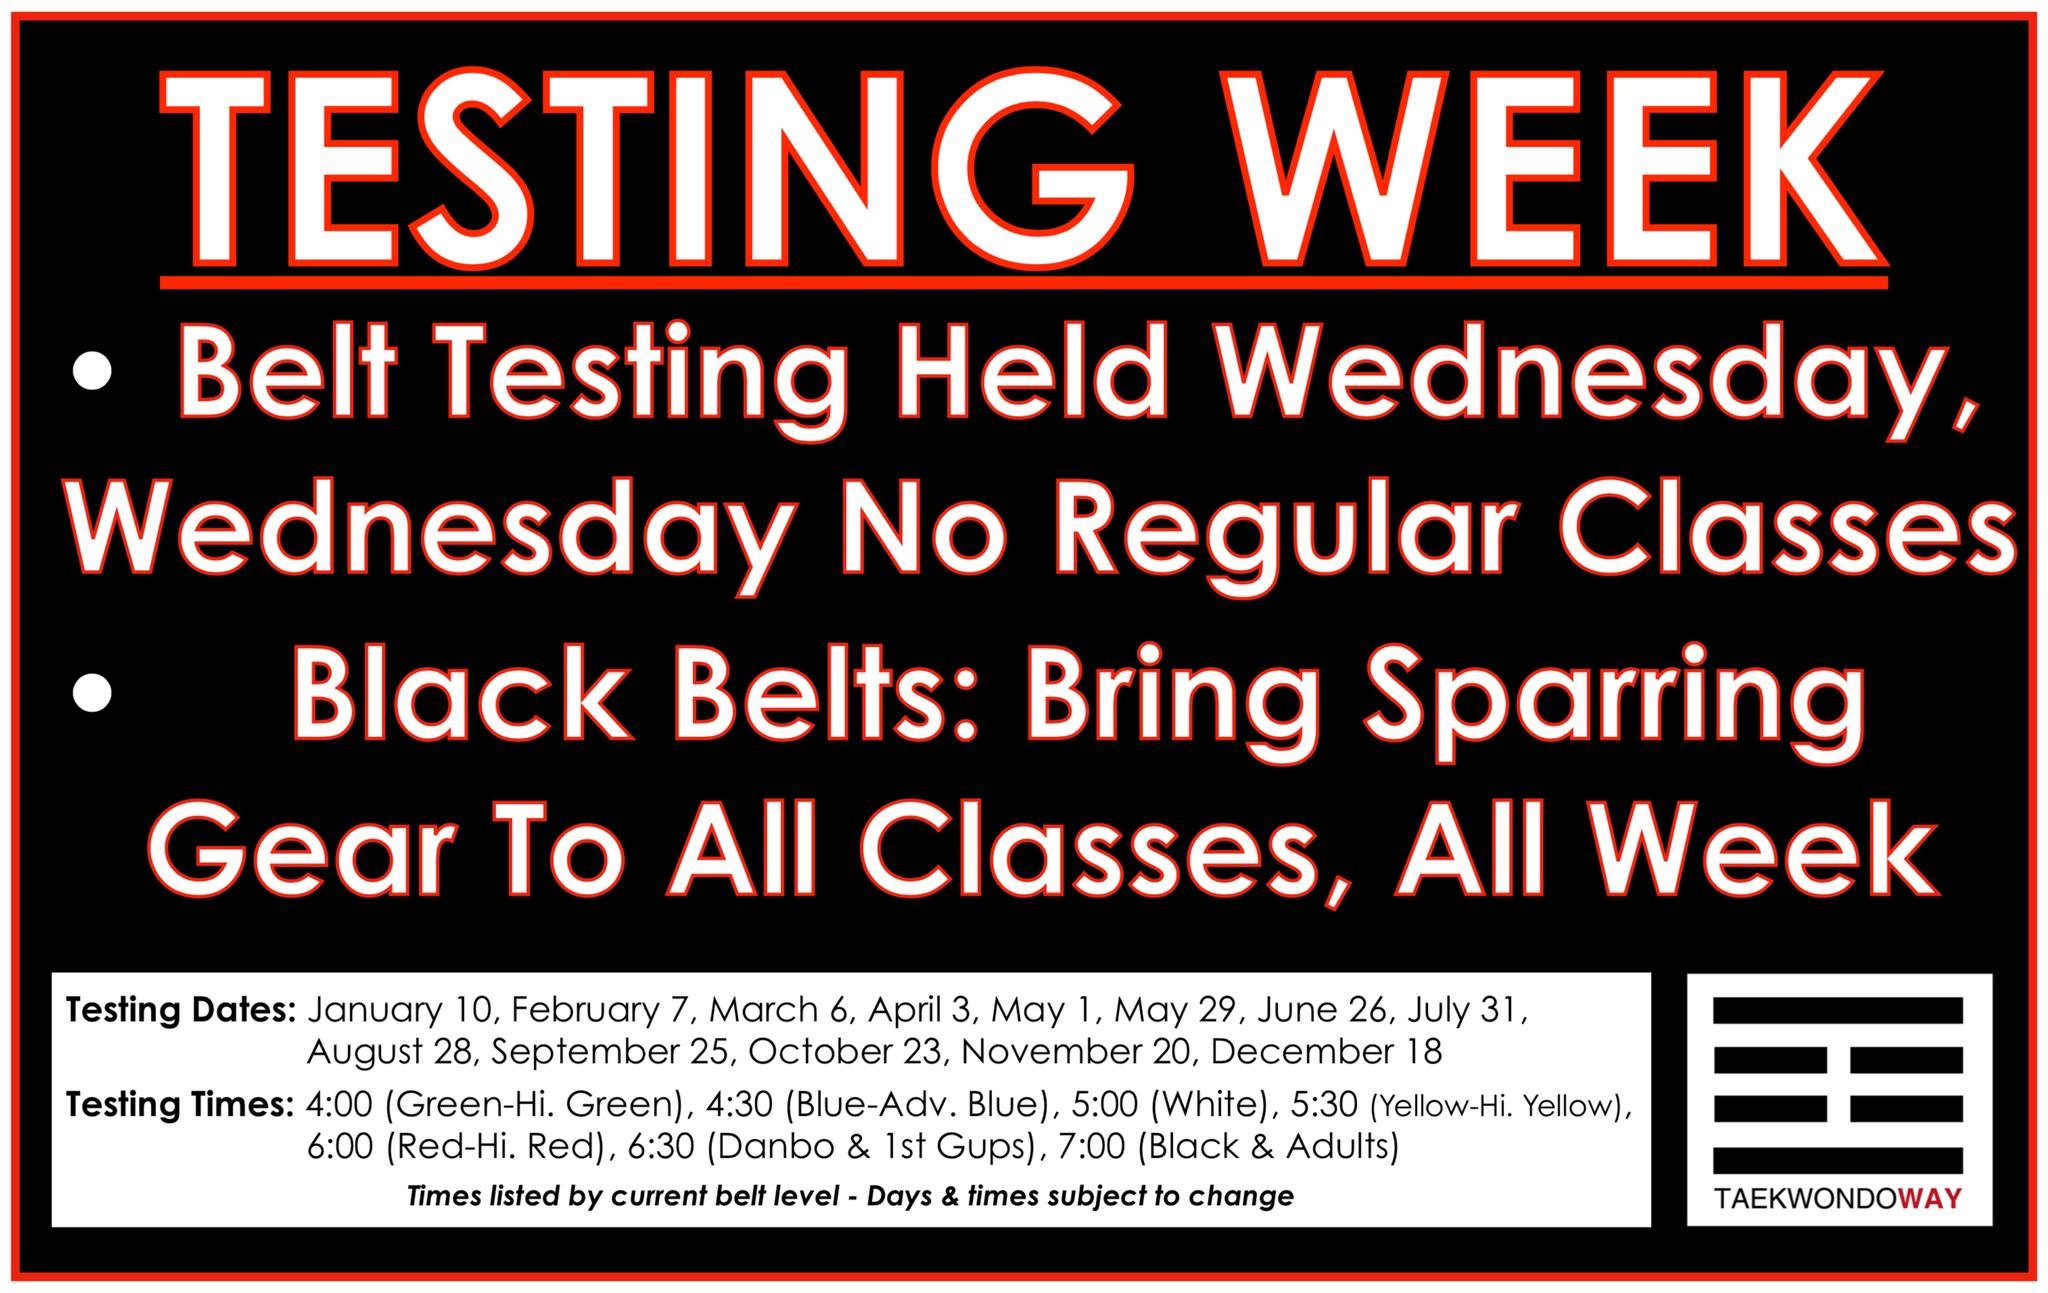 Remember that this week is testing week!  There will be no regular classes on Wednesday.  Good luck to everyone!